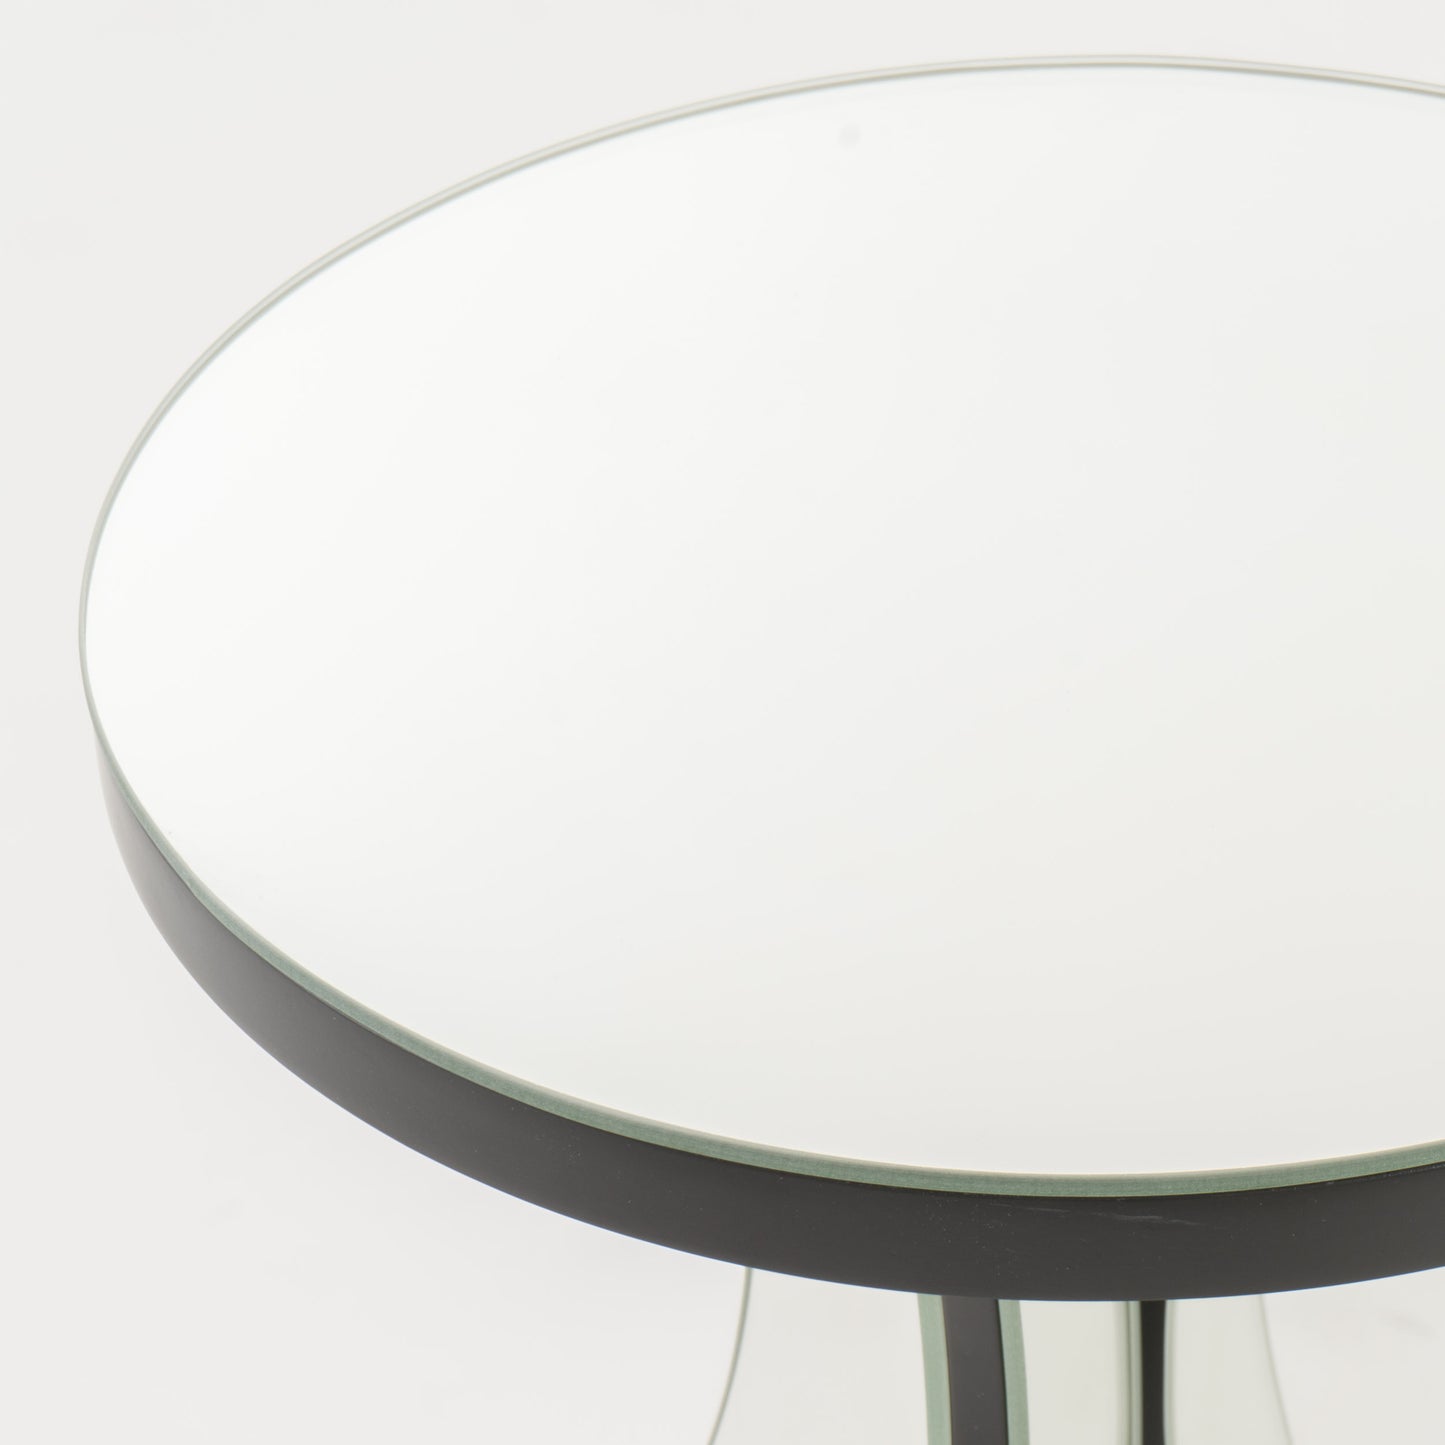 Tyne Modern Glam Curvy Mirror Accent Table with Circular Tabletop